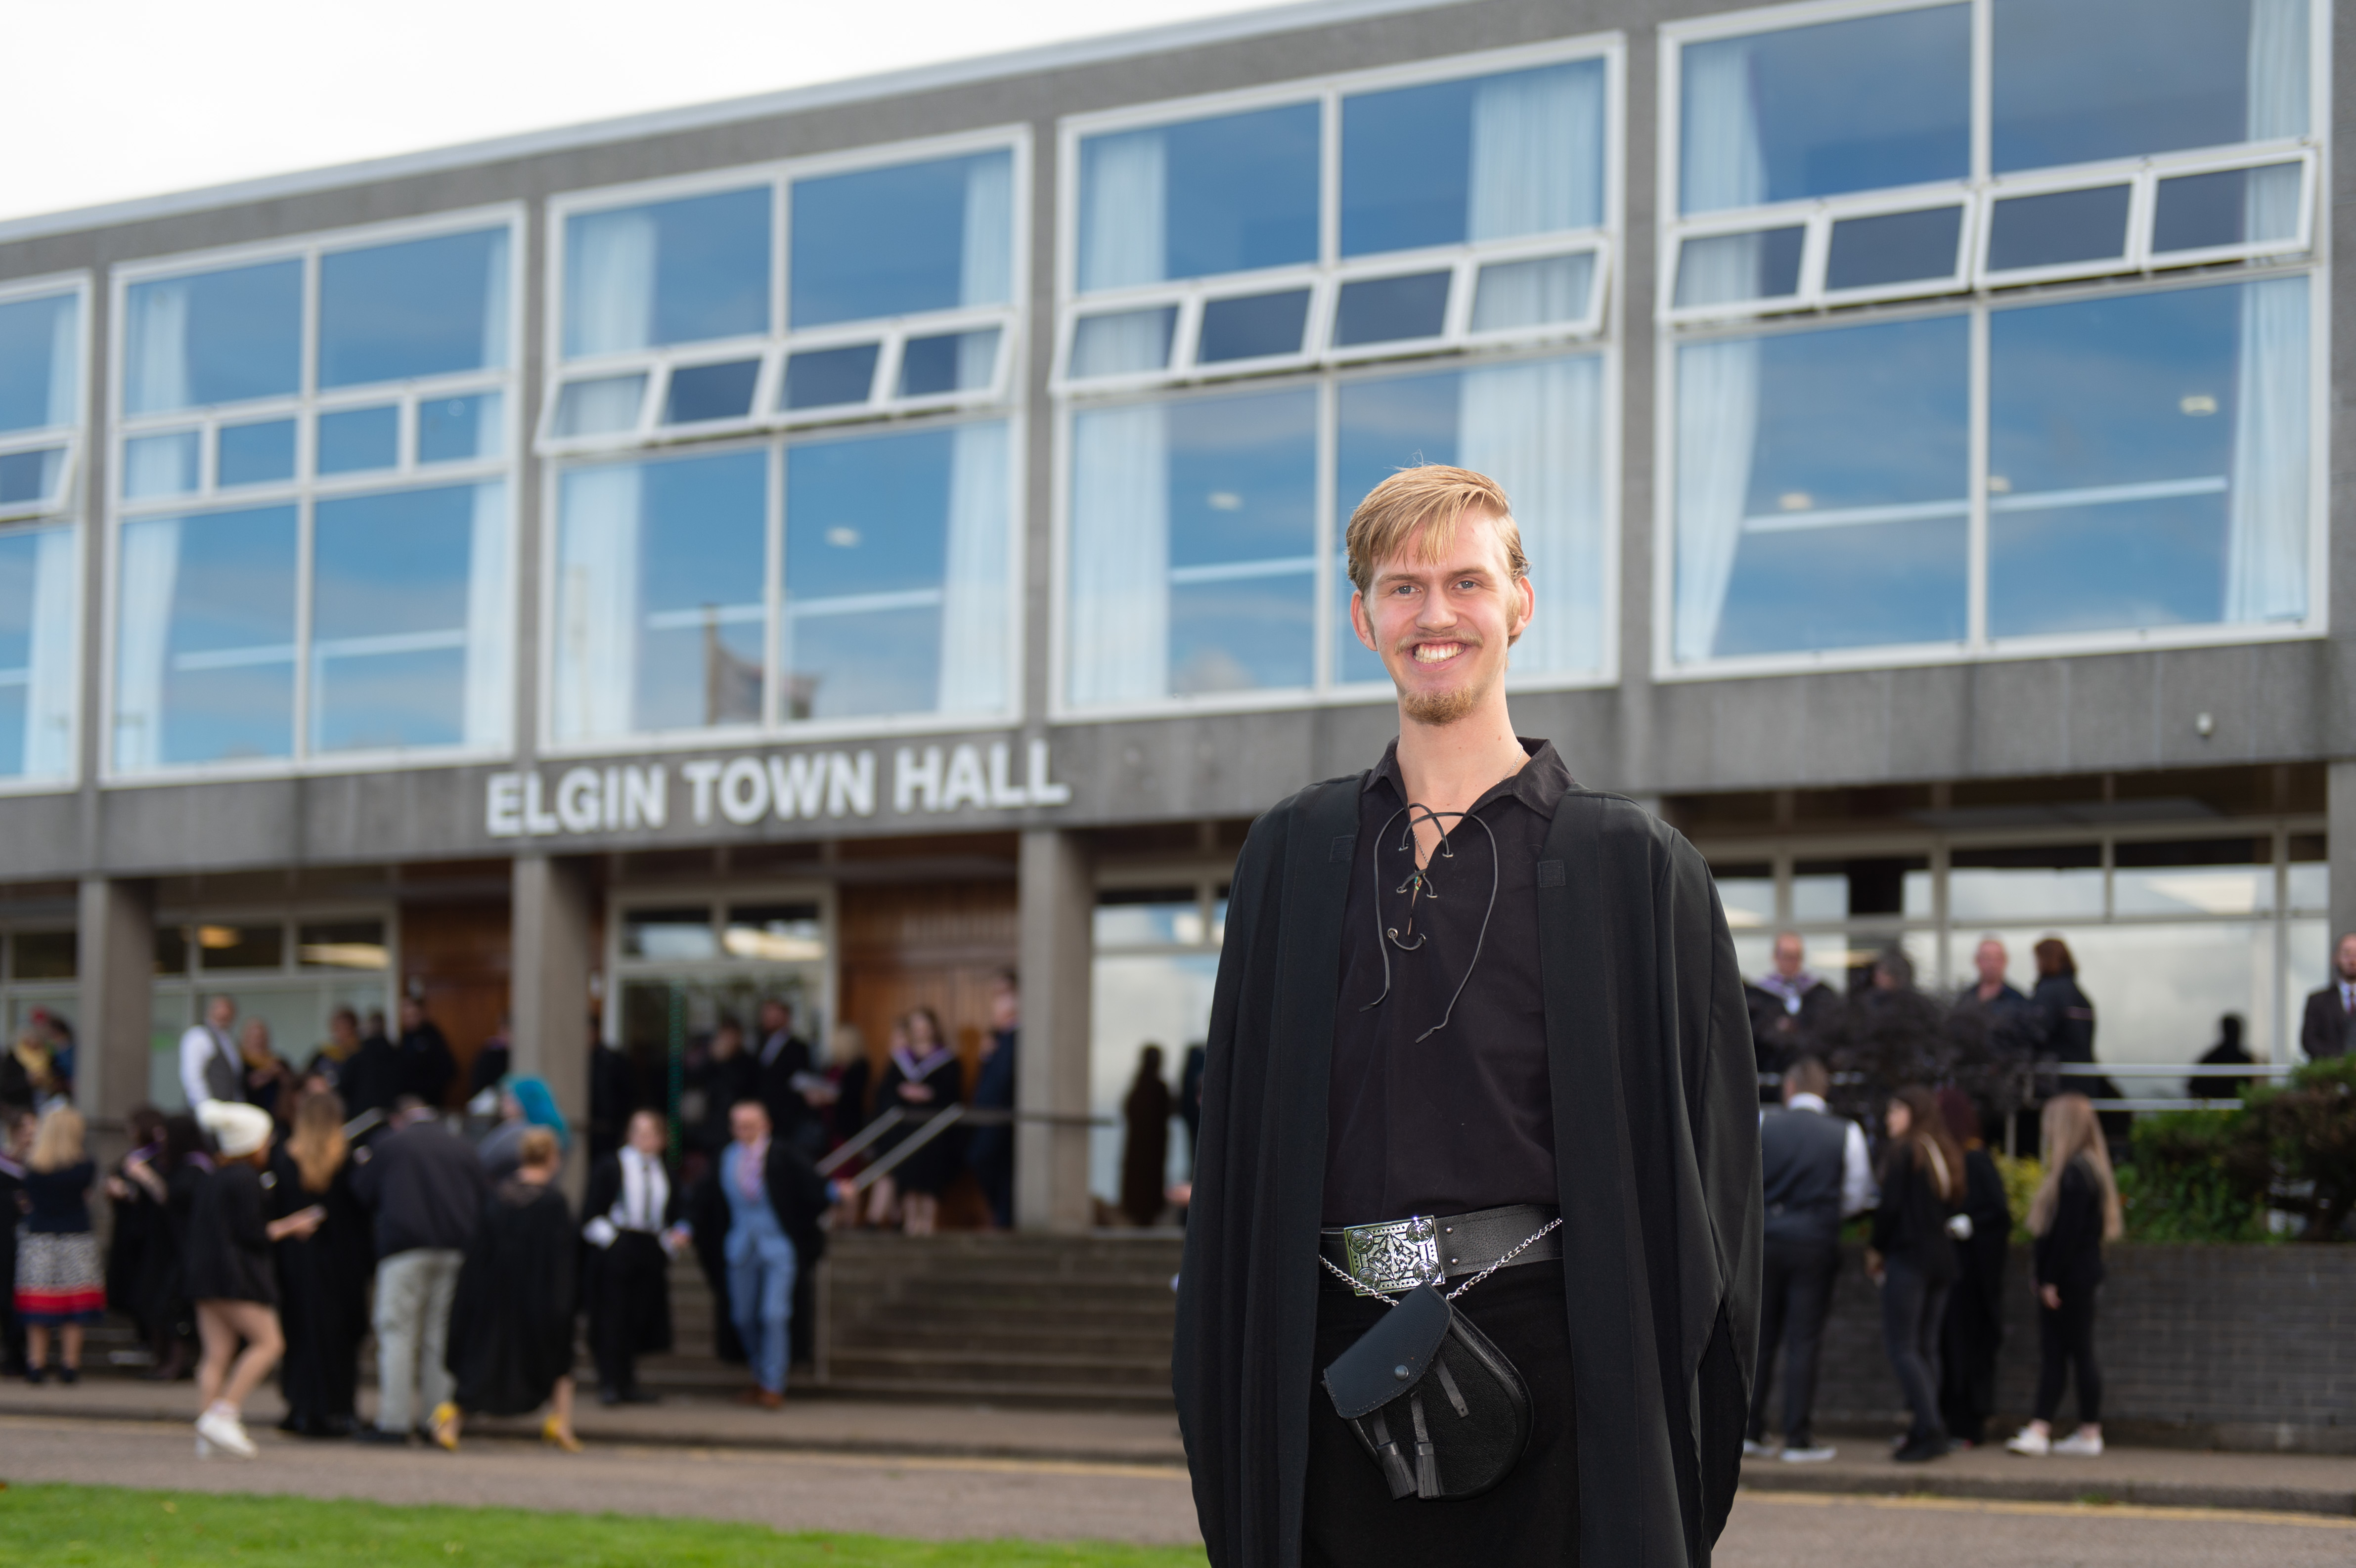 Robbie Mungersdorf pictured at Elgin Town Hall, Moray.